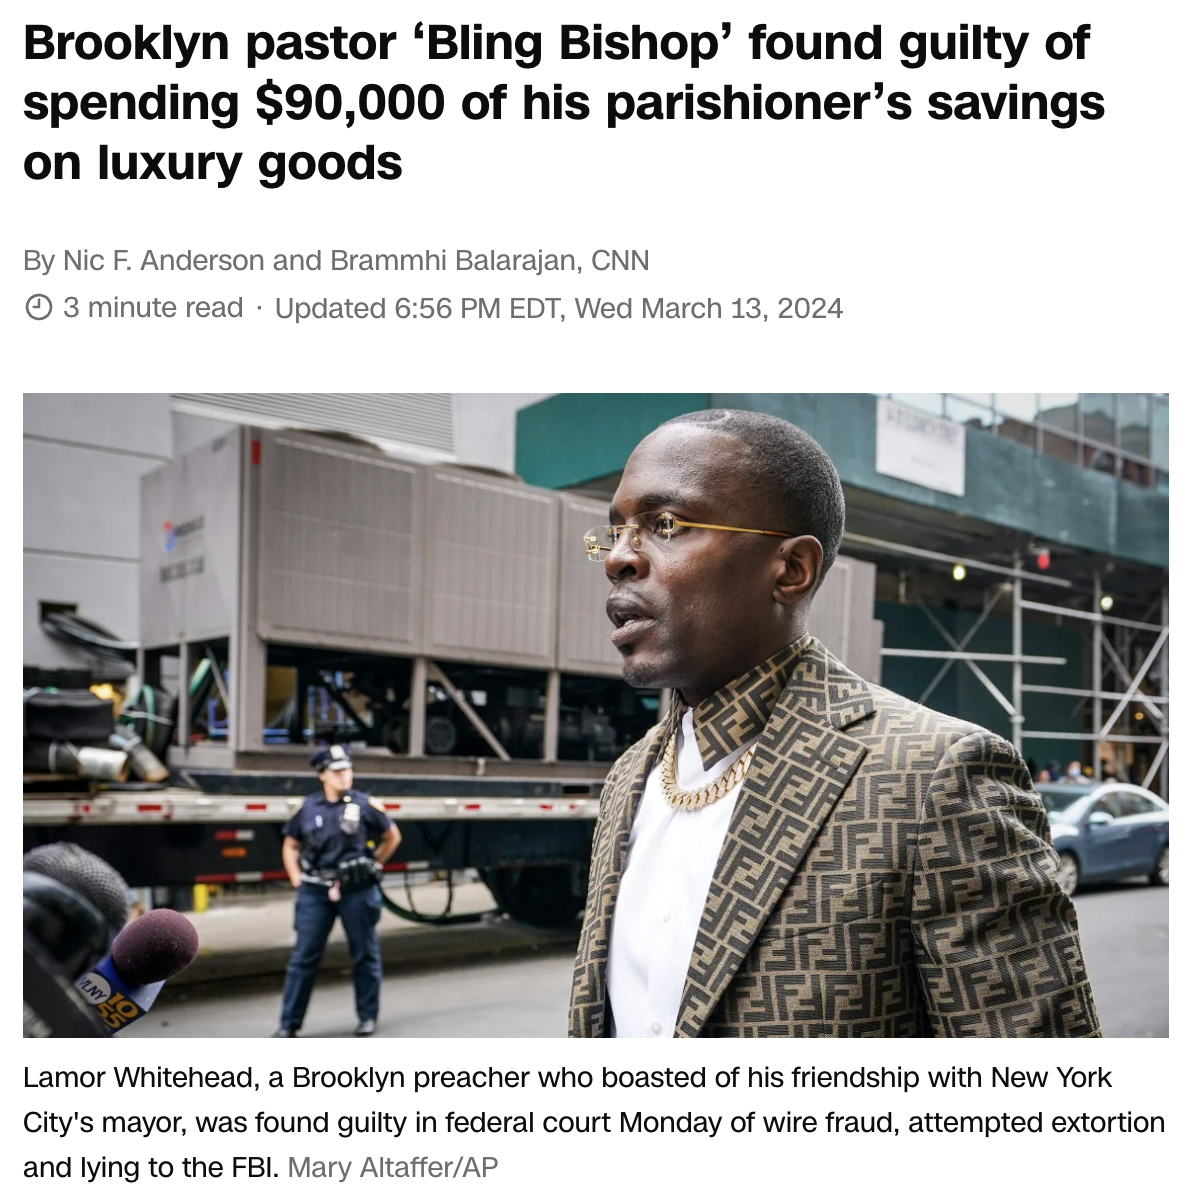 new york city violence meme - Brooklyn pastor 'Bling Bishop' found guilty of spending $90,000 of his parishioner's savings on luxury goods By Nic F. Anderson and Brammhi Balarajan, Cnn 3 minute read Updated Edt, Wed Lamor Whitehead, a Brooklyn preacher wh